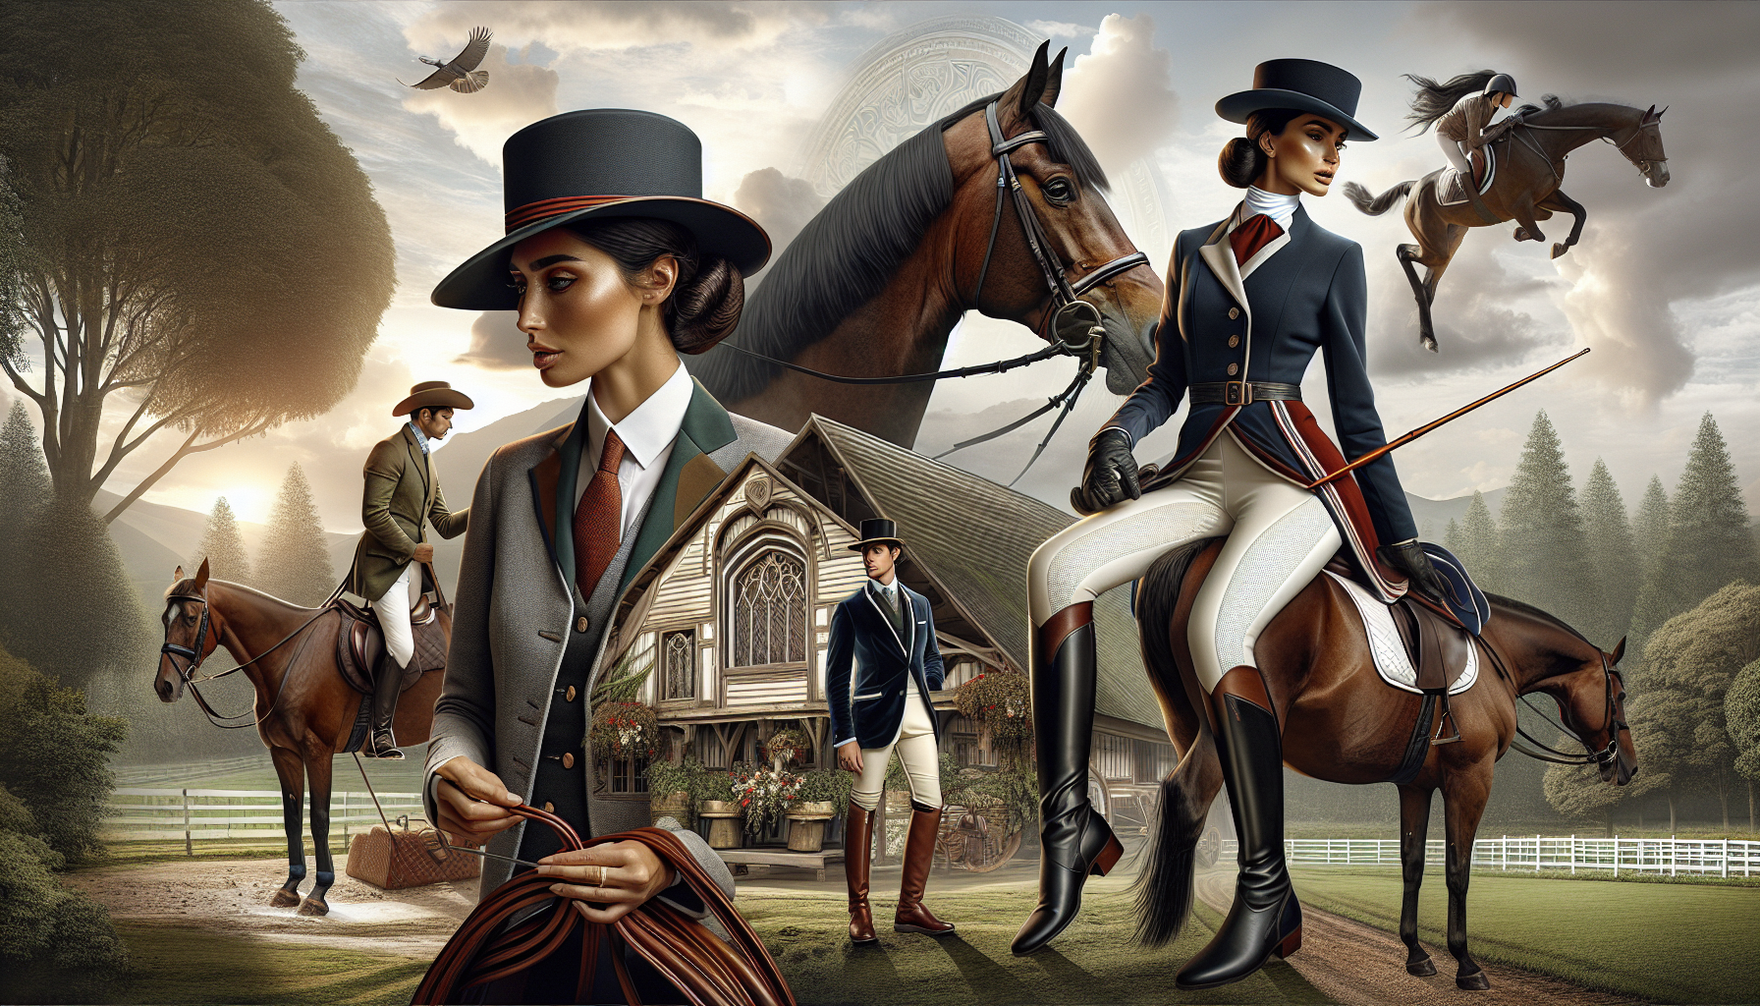 A composition showcasing the resurgence of classic equestrian fashion. In the foreground, a South Asian woman in a traditional riding hat, jacket, and boots, holding a riding crop. In the midground, a